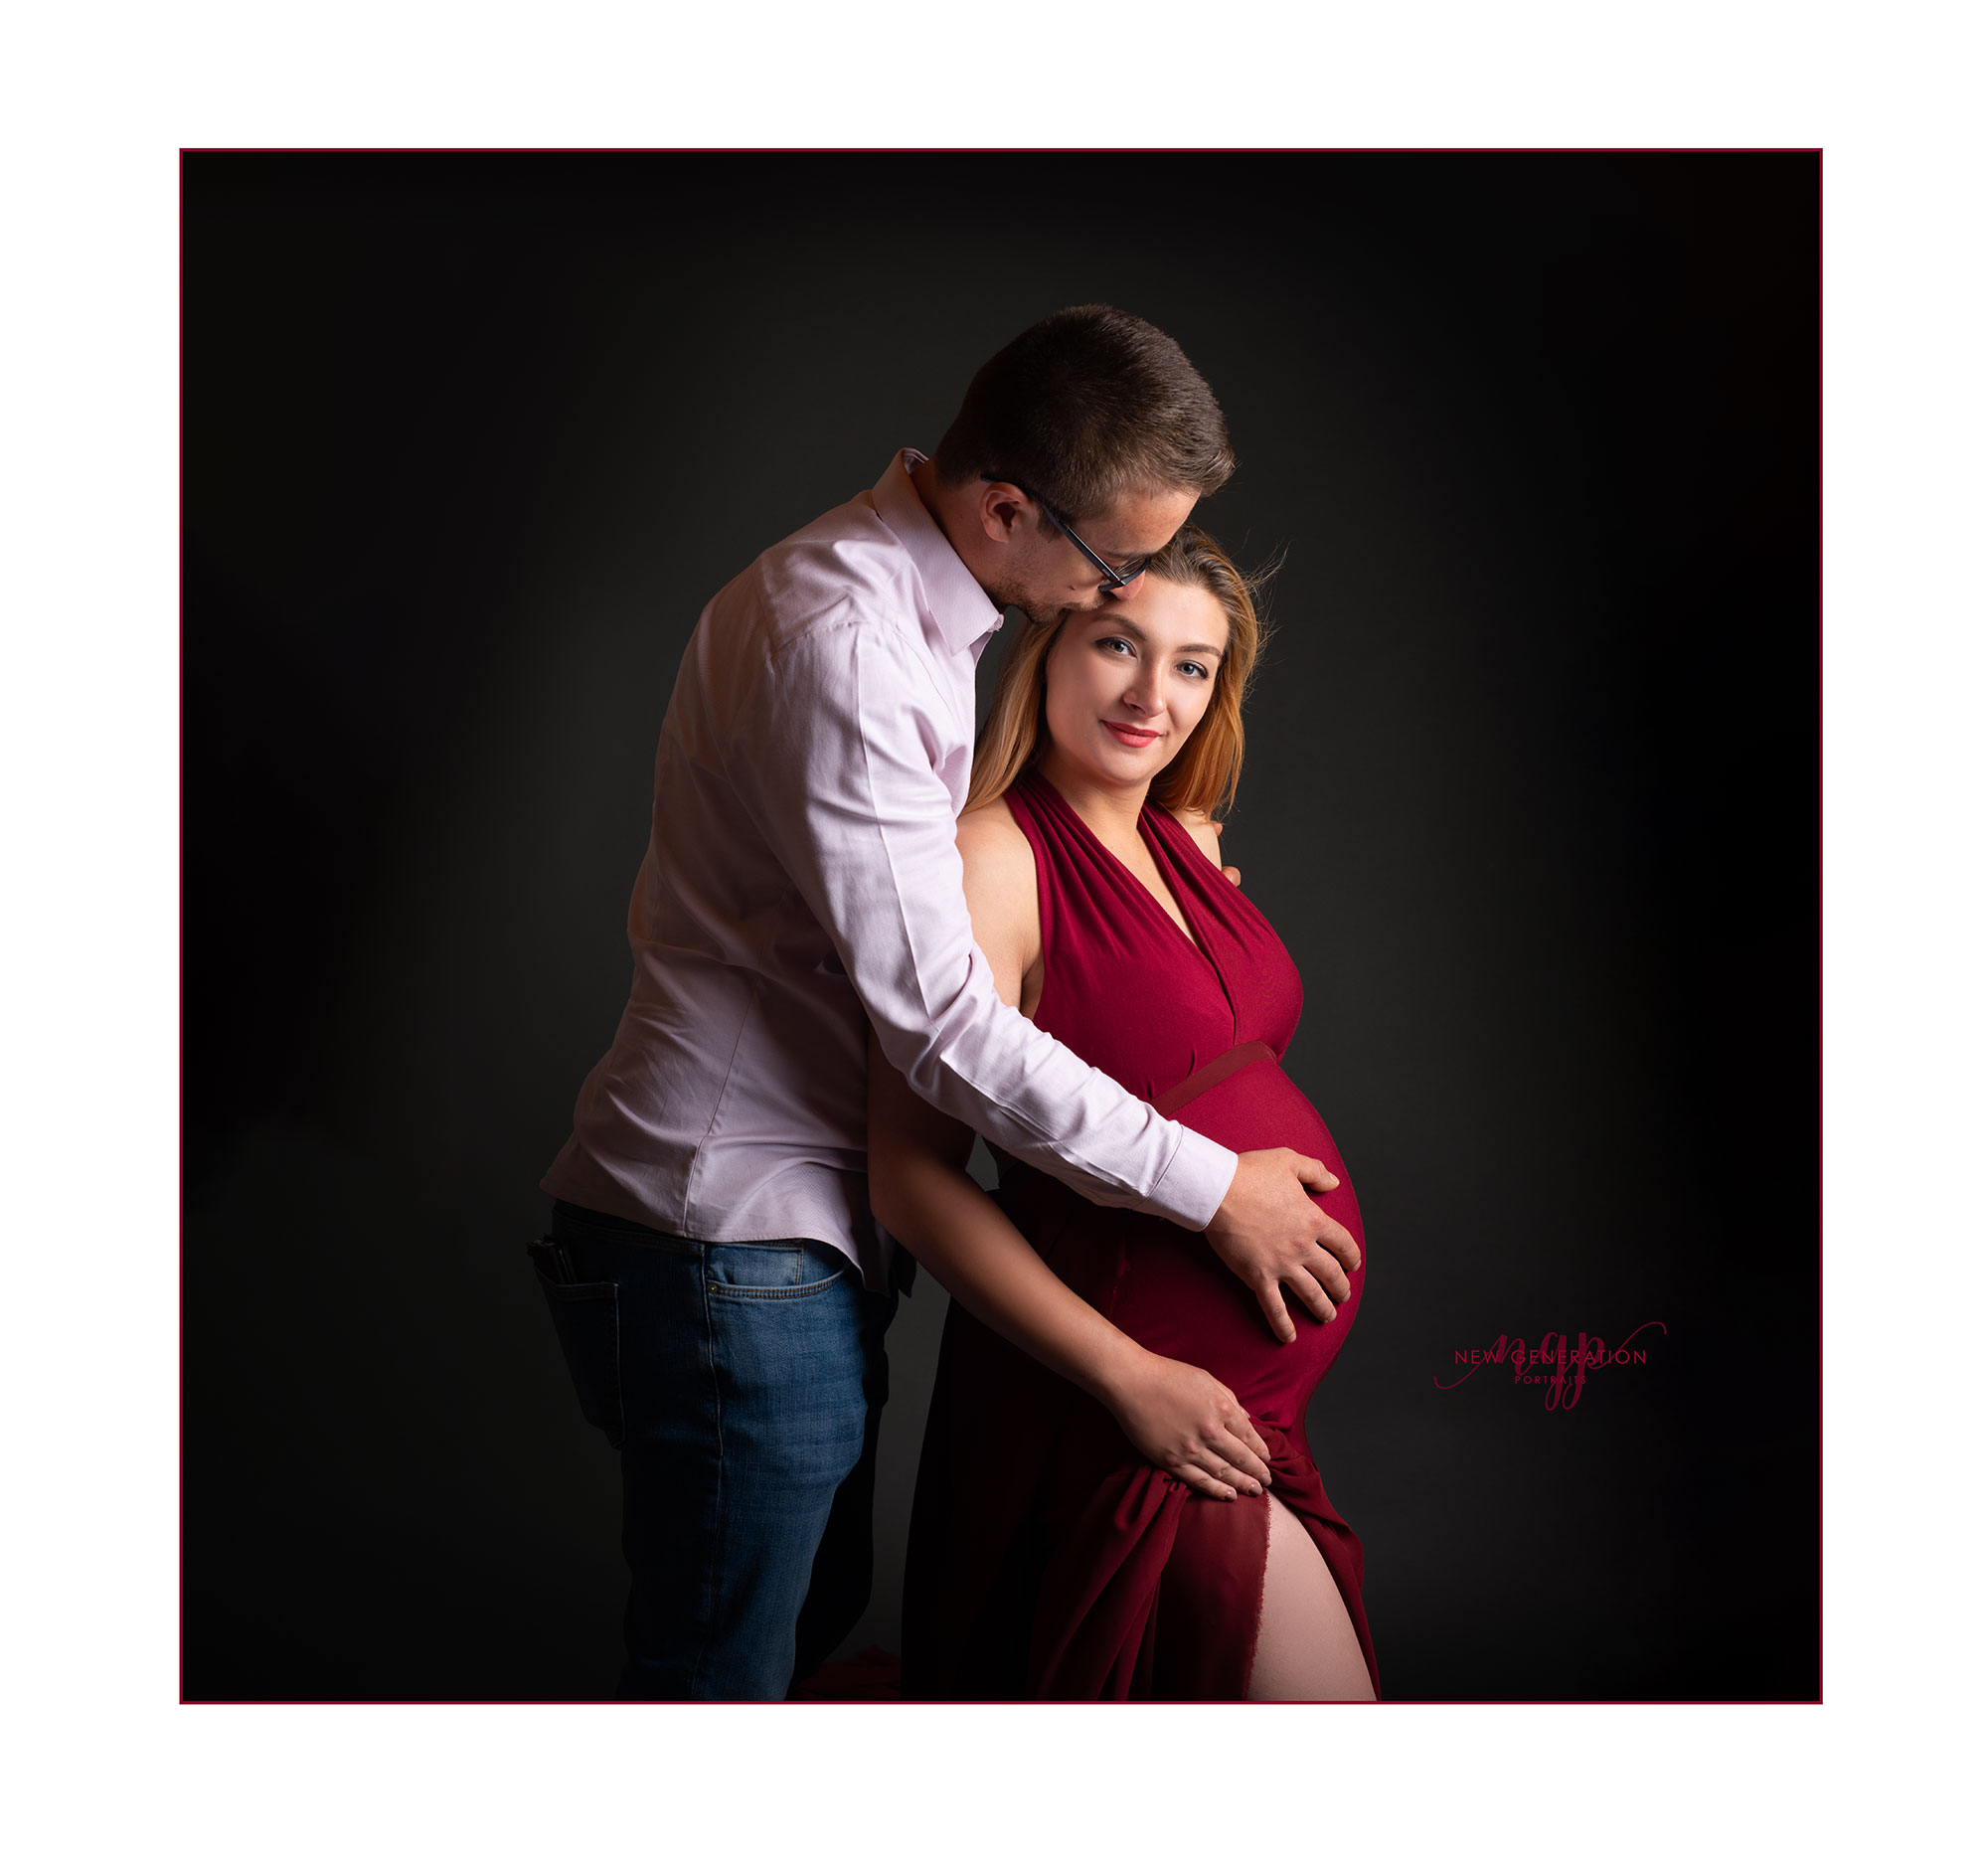 couple holding their baby bump. lady wearing red dress on dark grey background. Captured by New Generation Portraits.